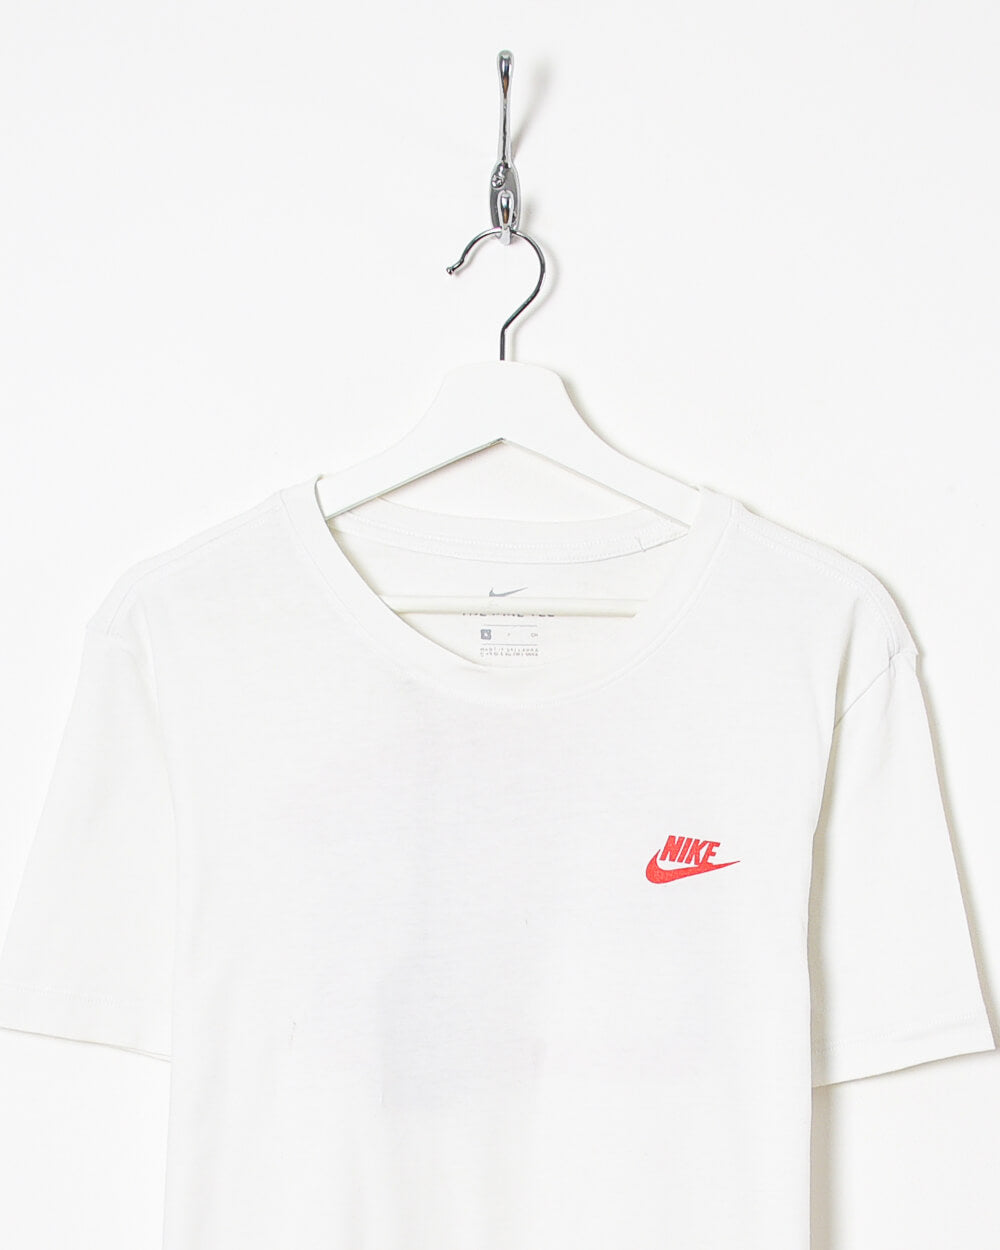 Nike Just Do It T-Shirt - Medium - Domno Vintage 90s, 80s, 00s Retro and Vintage Clothing 